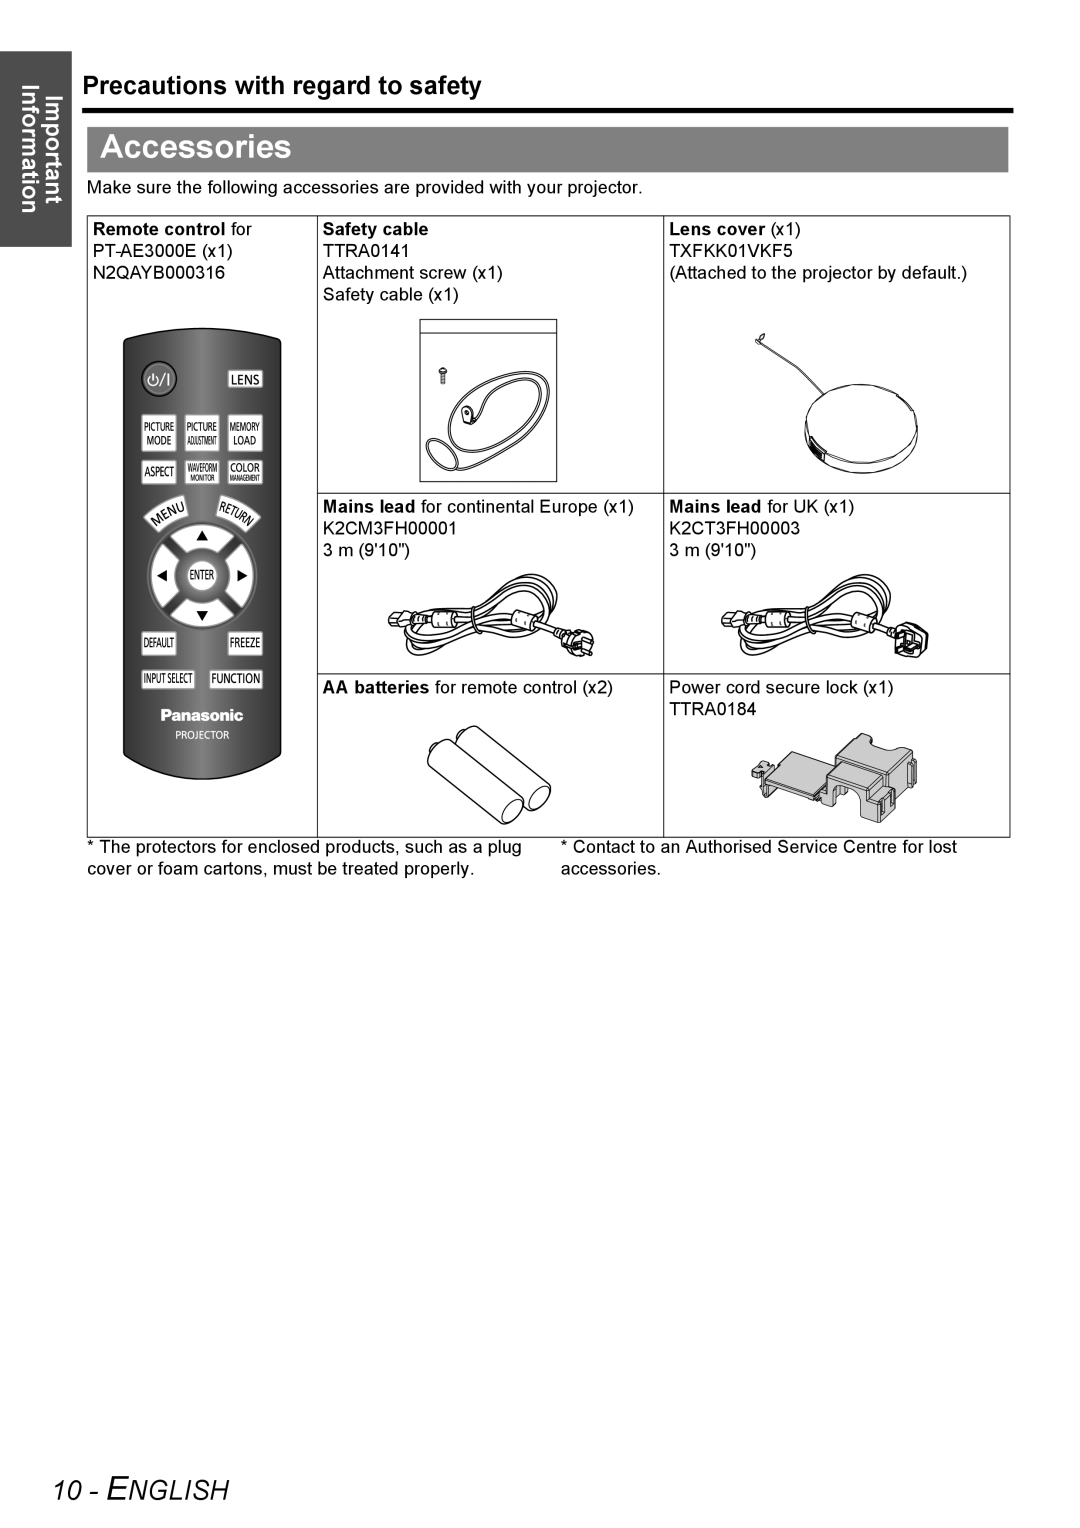 Panasonic PT-AE3000E manual Accessories, English, Precautions with regard to safety, Important Information 